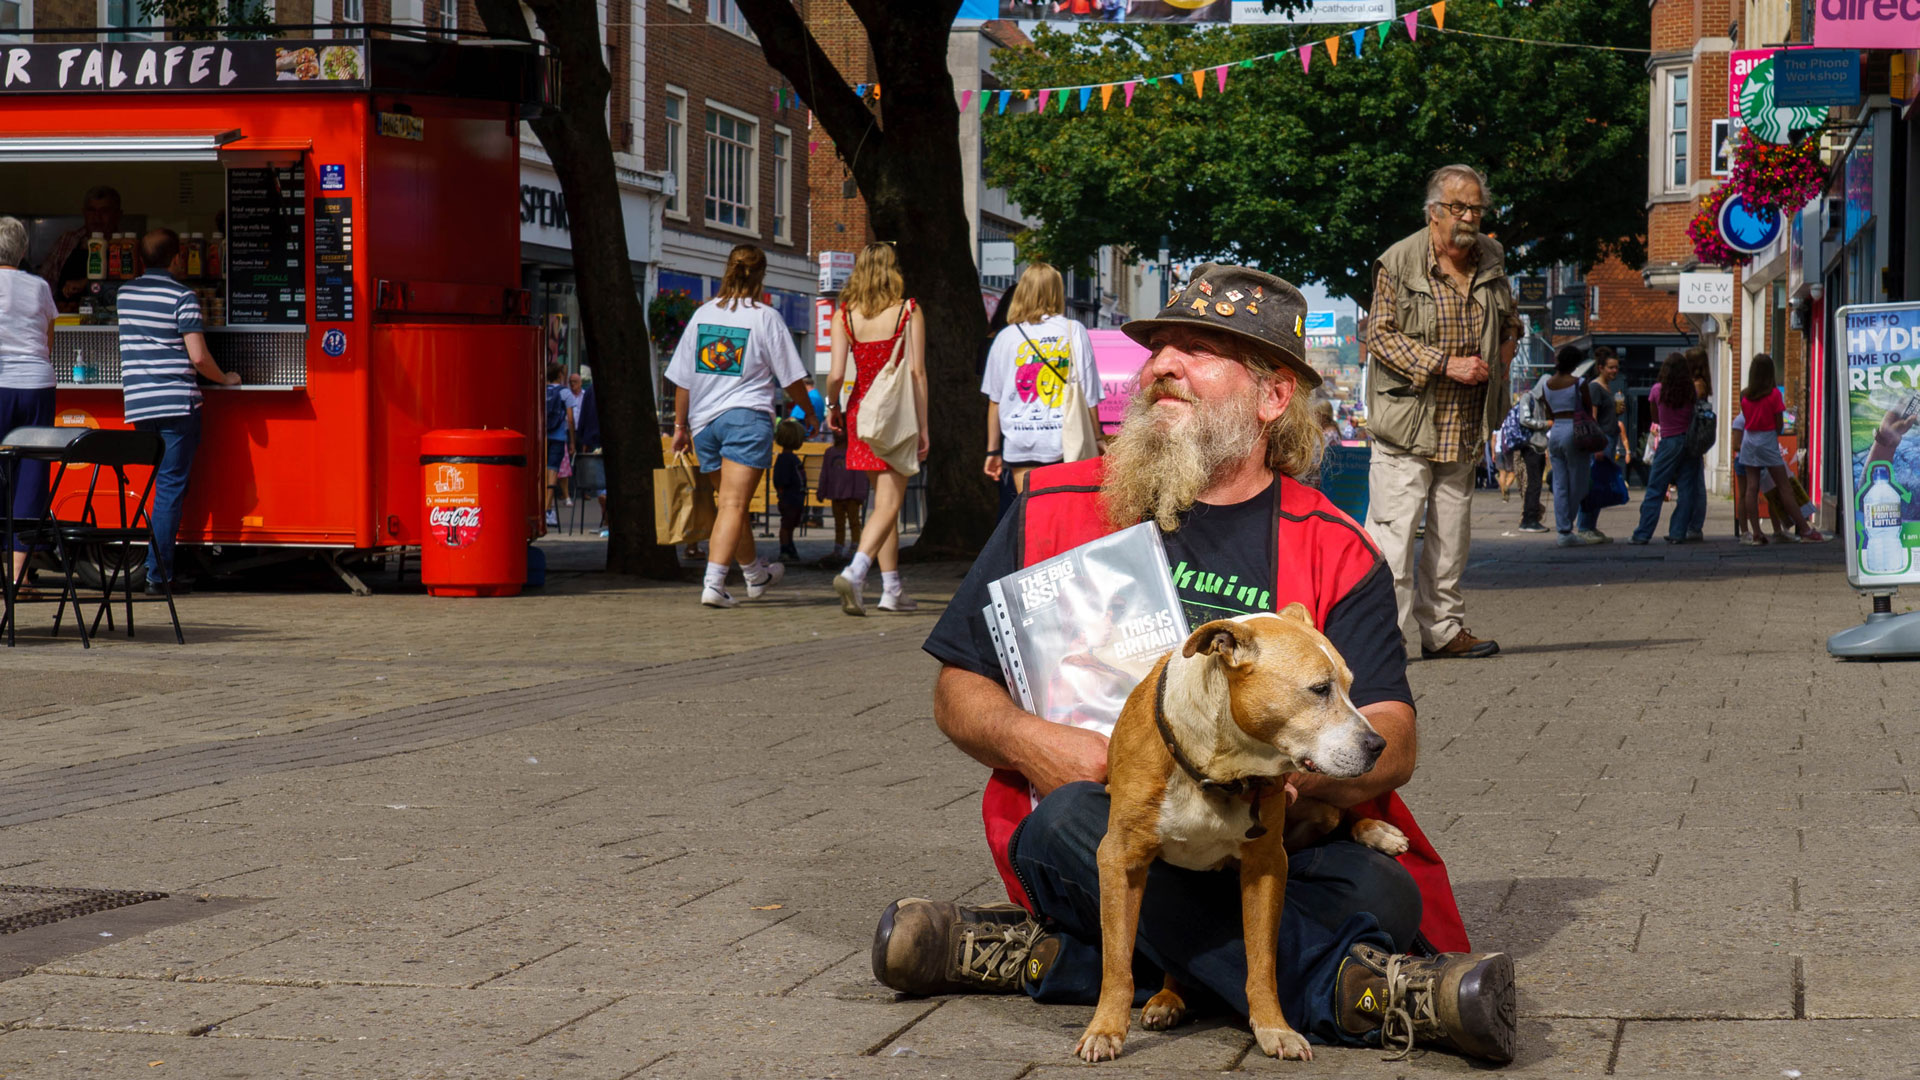 Darren Roberts sells the Big Issue on the high street in Canterbury